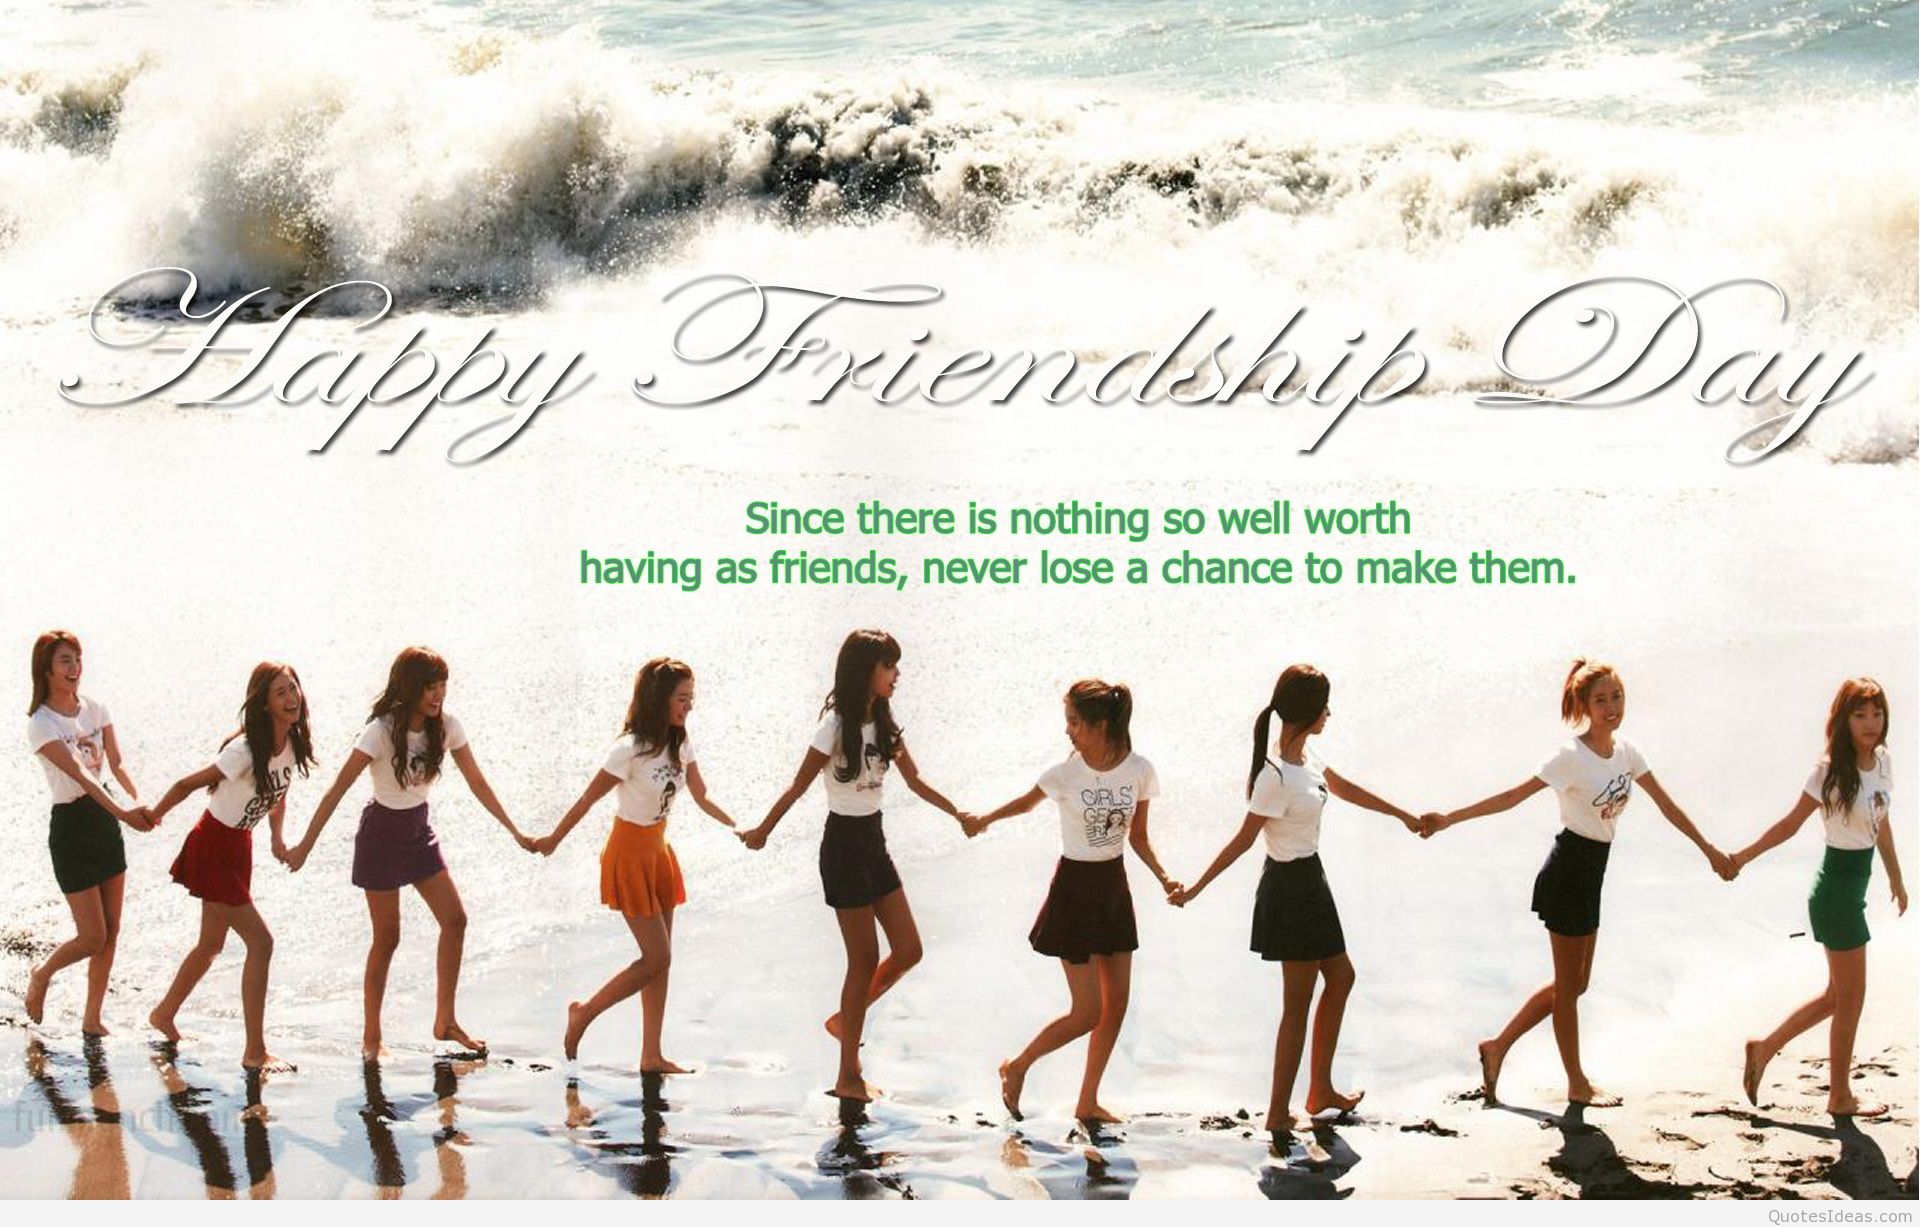 Happy friendship day 2023 greetings cards ecards pictures image